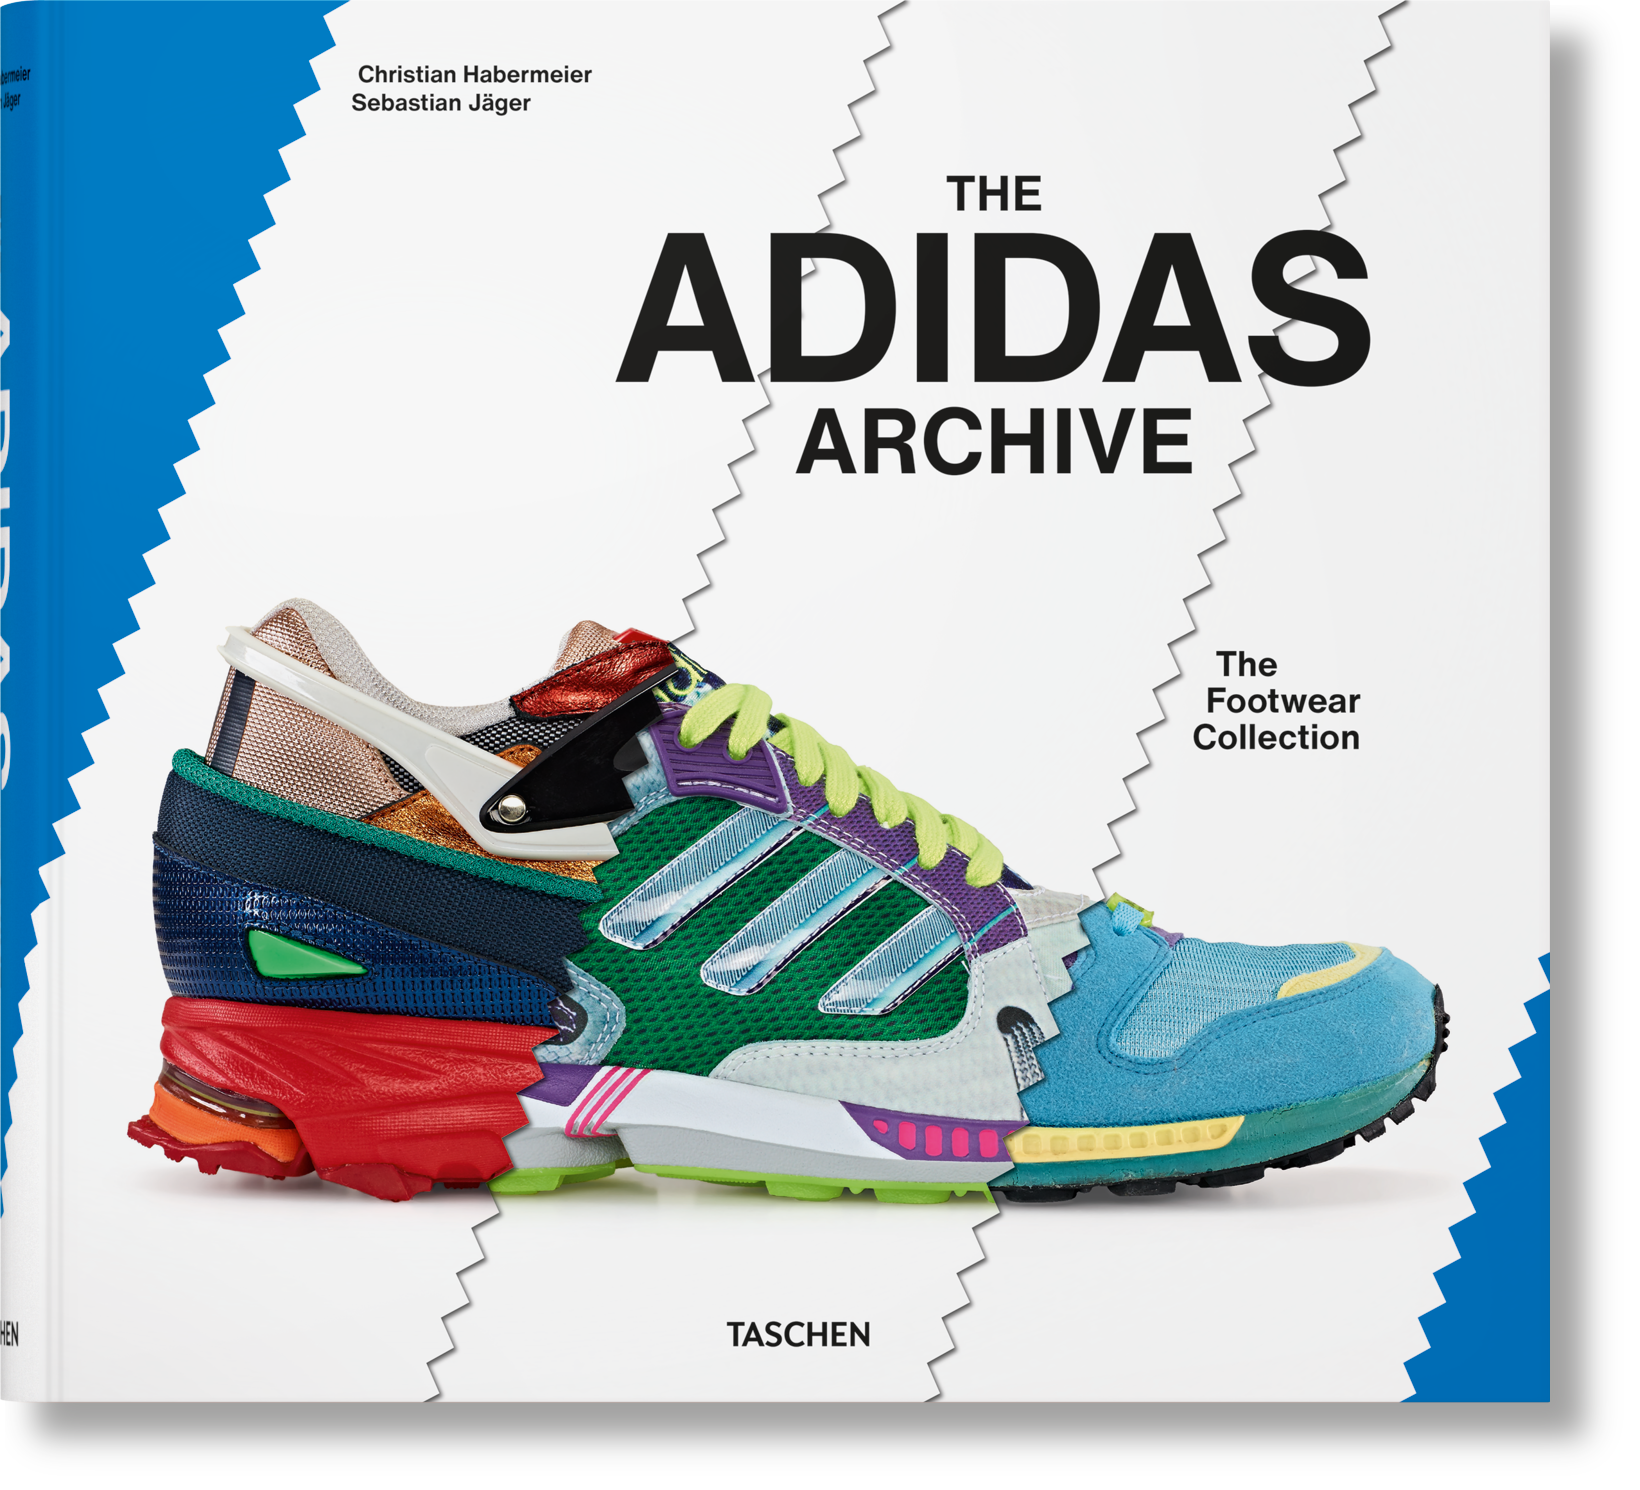 Thrills: The history of the adidas shoe, its earliest beginnings until today | Papercut